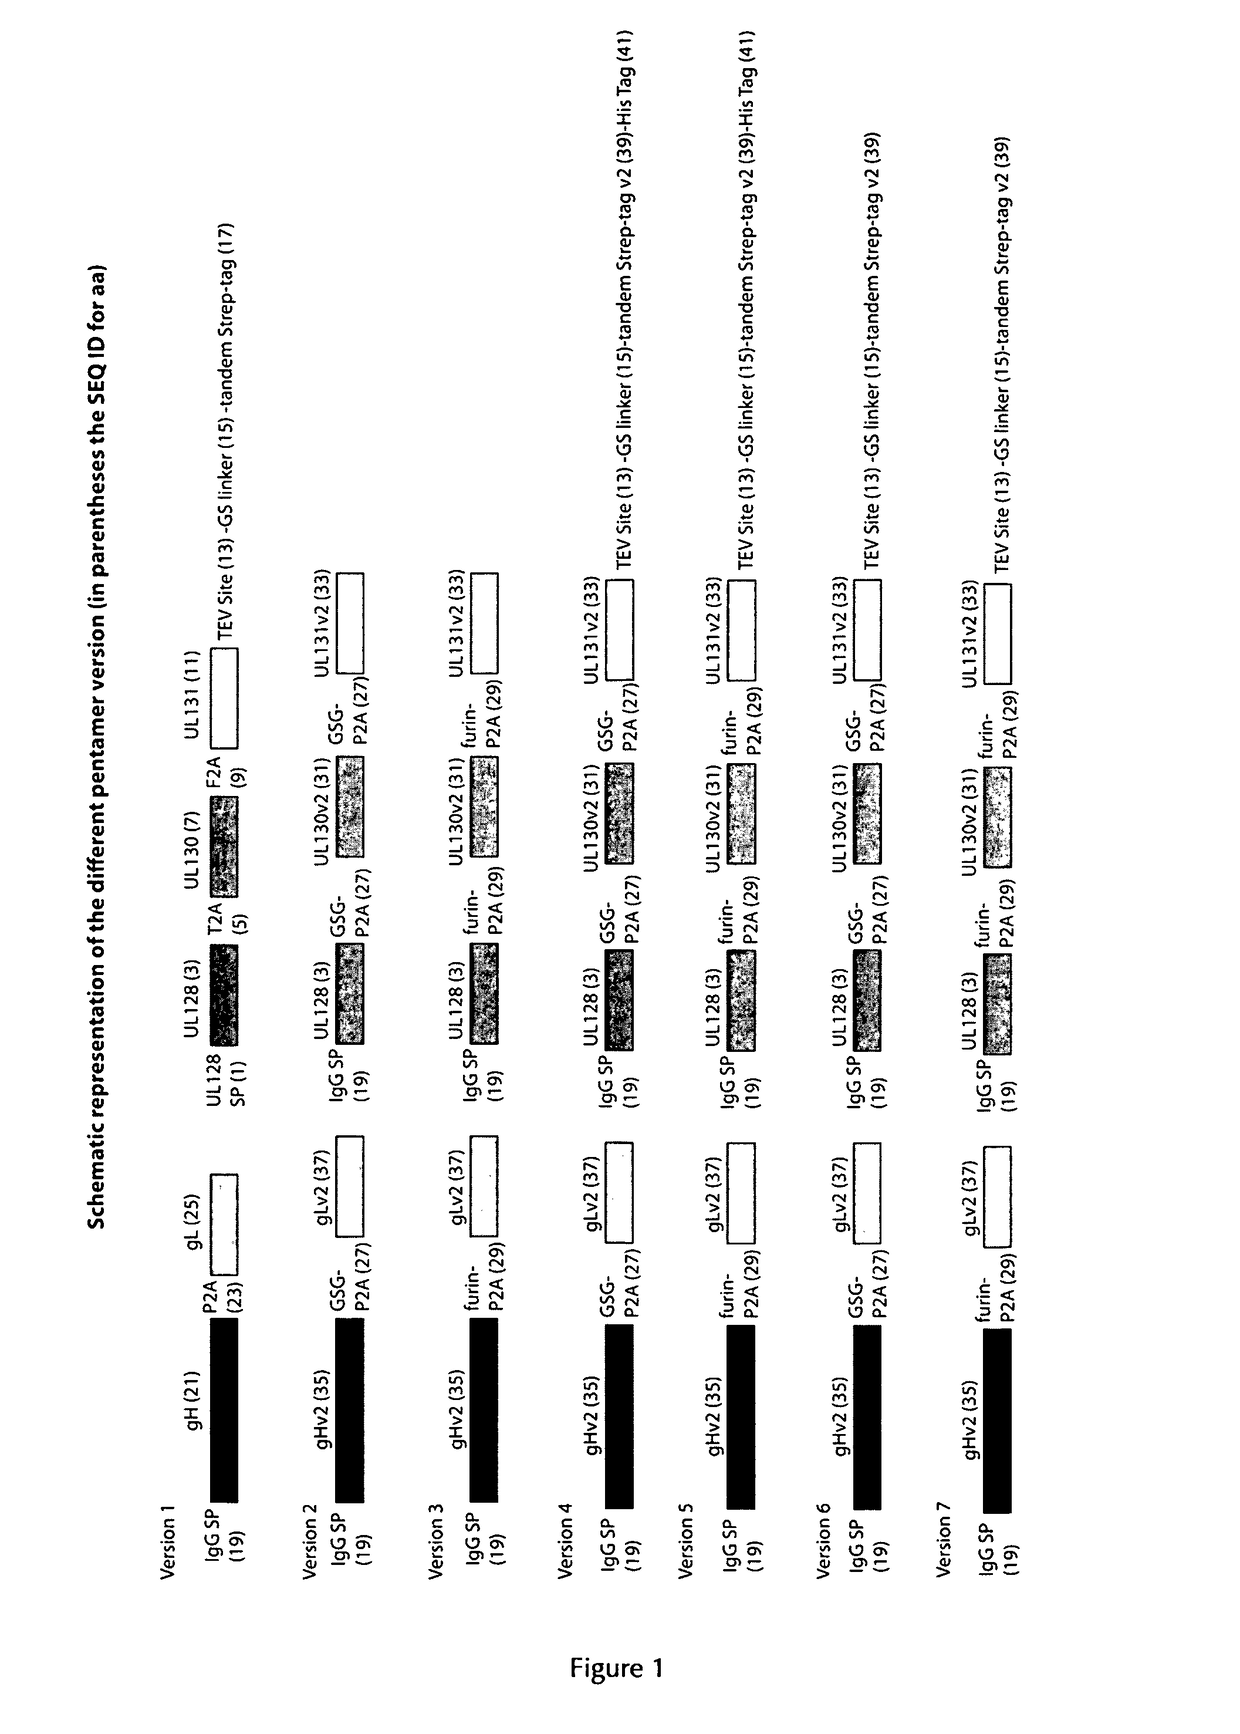 Human cytomegalovirus vaccine compositions and method of producing the same